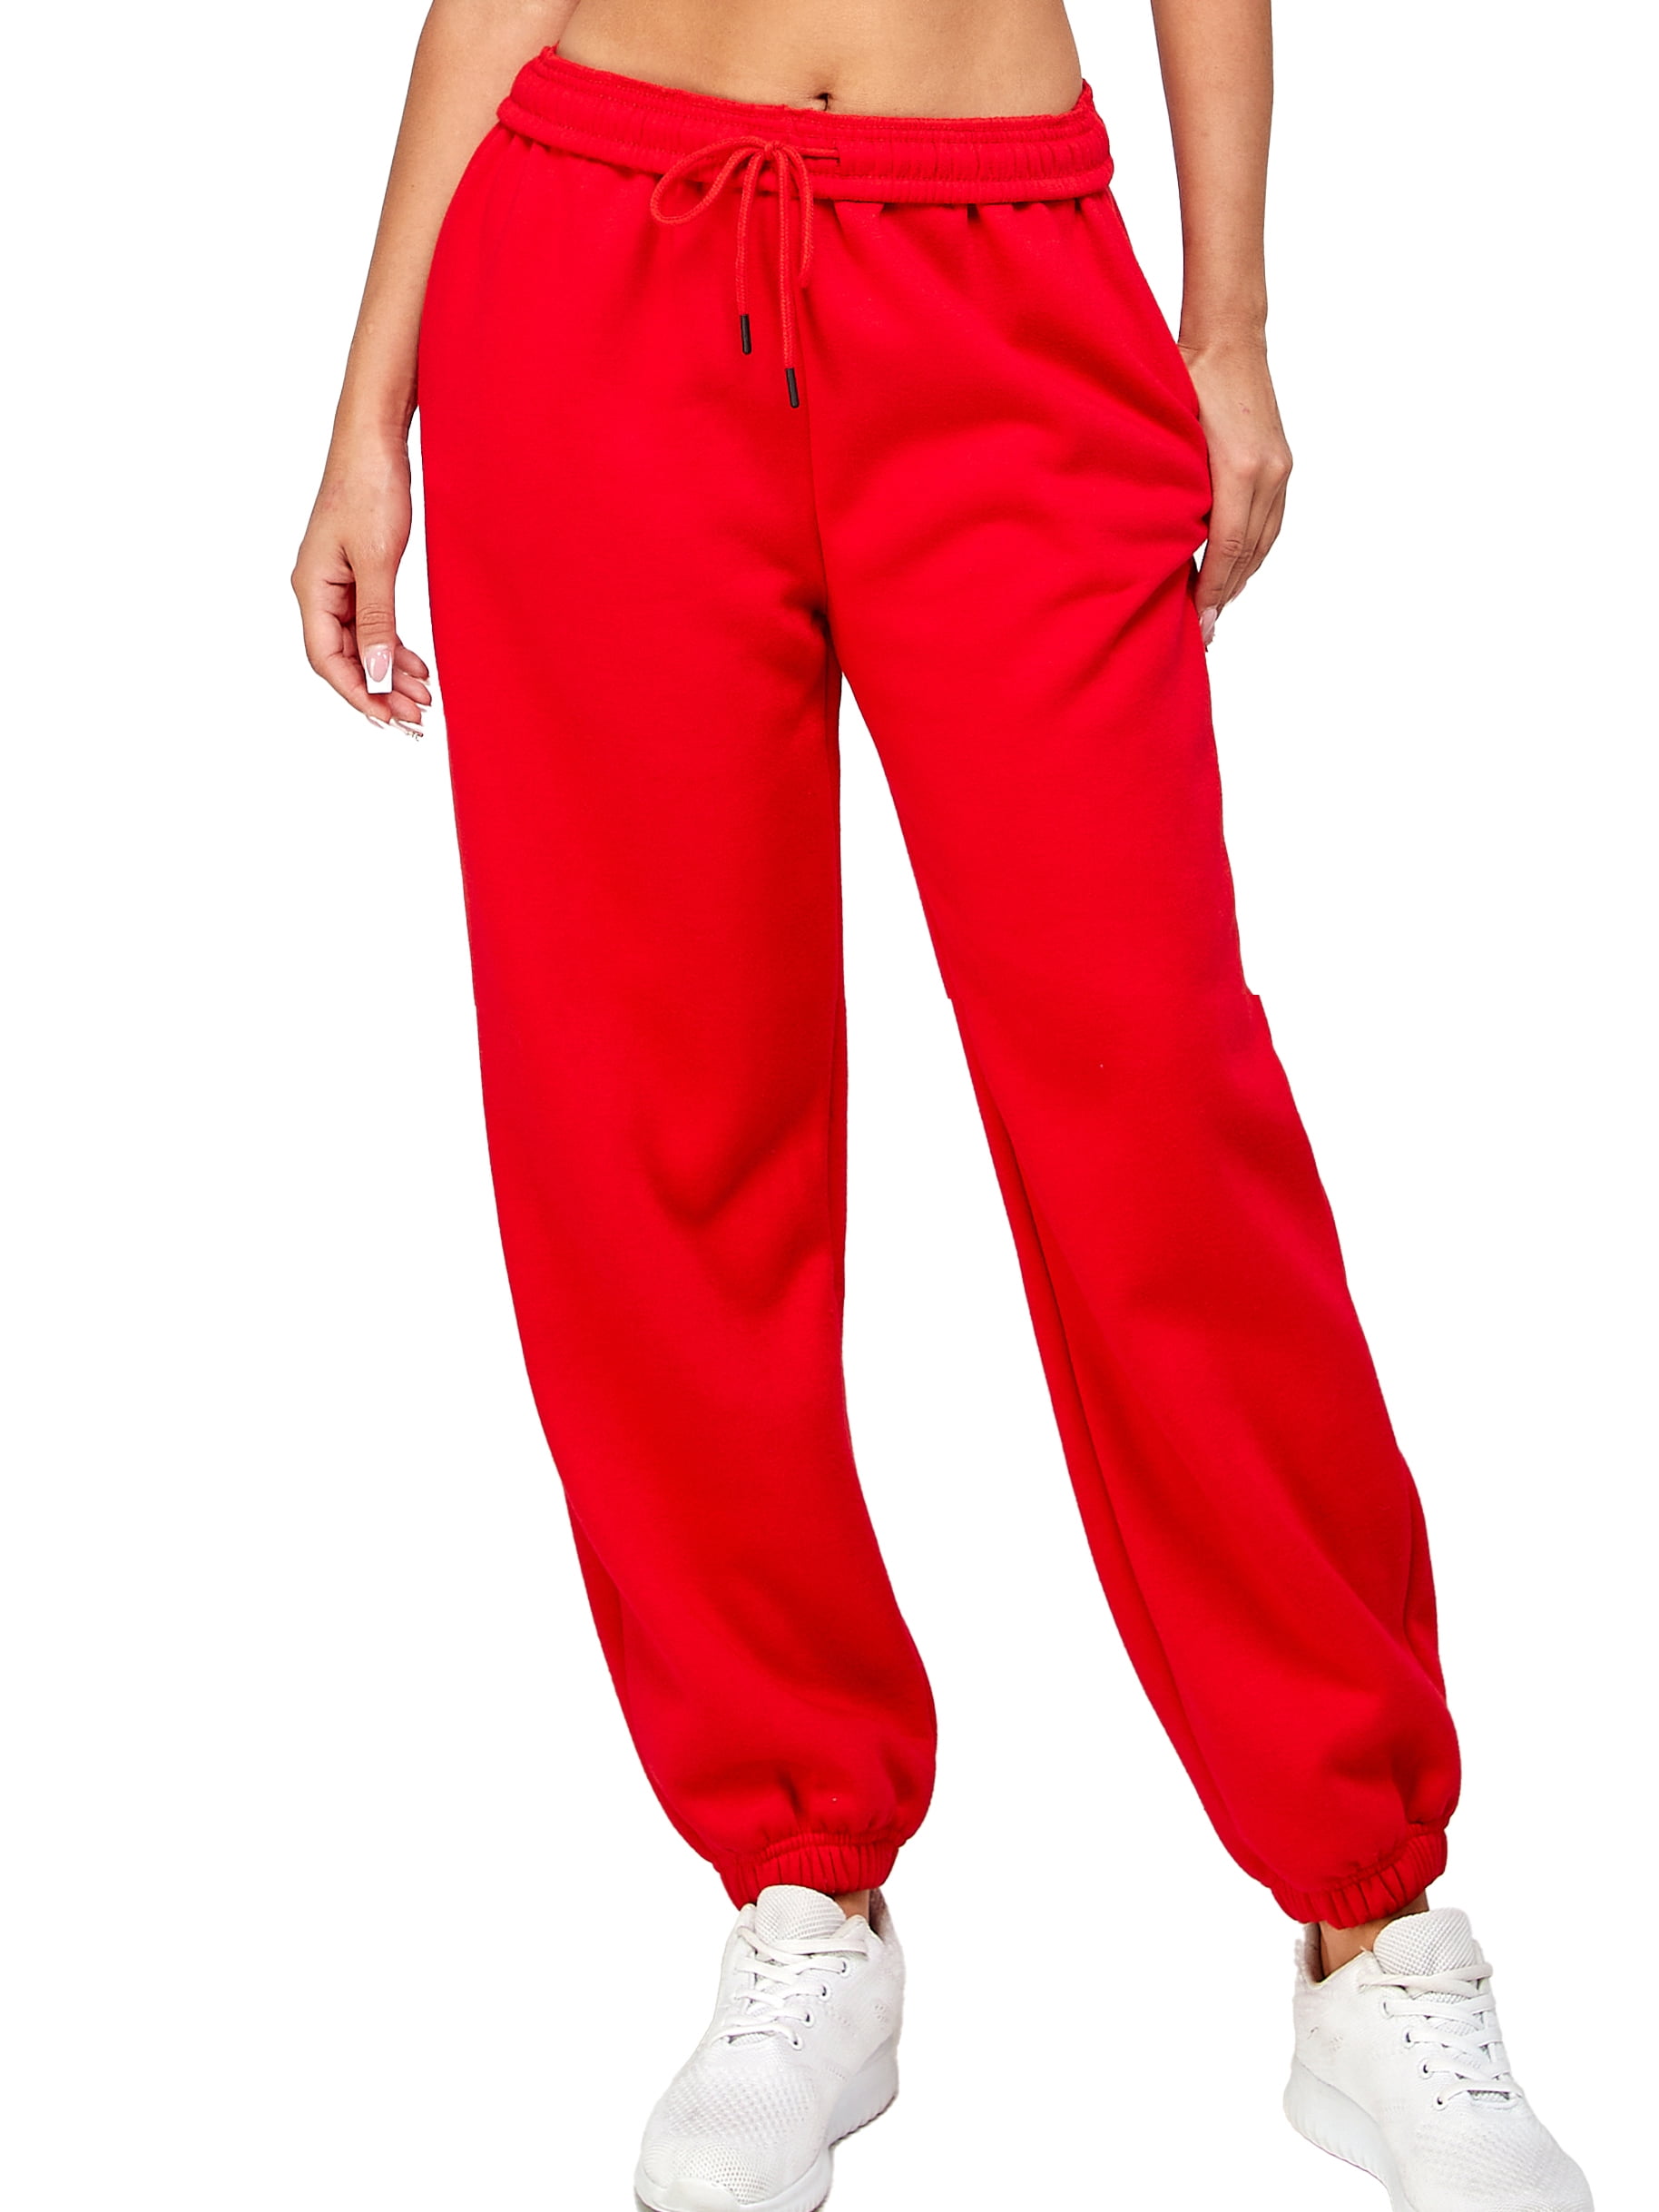 Sweatpants for Women - Relax Fit Womens Joggers Flippable Waistband ...